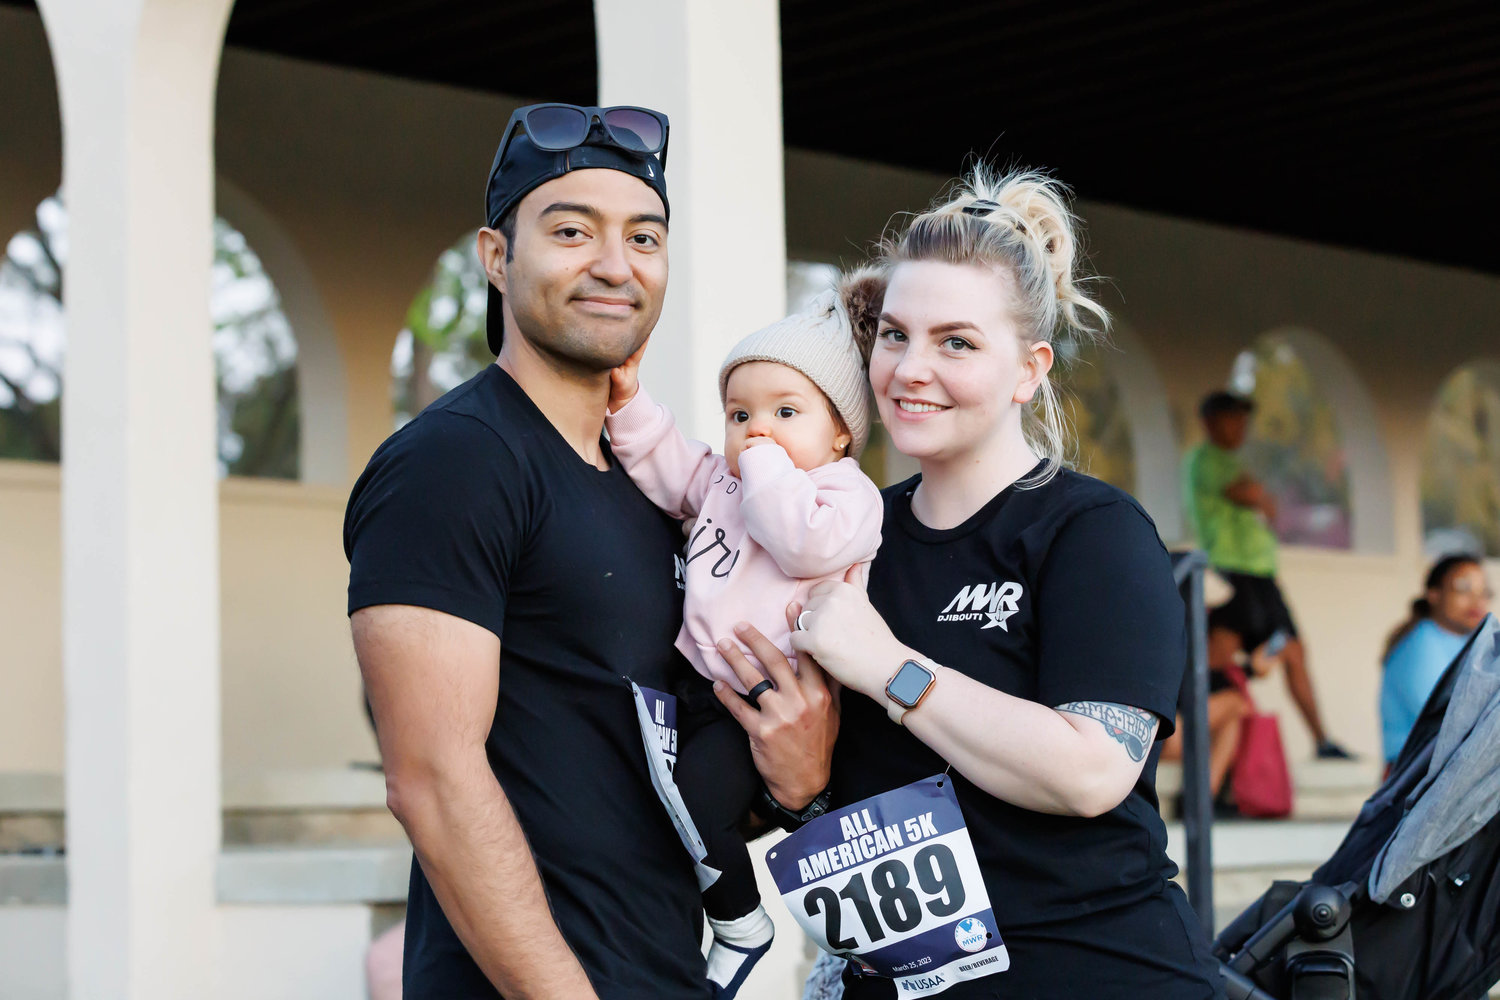 Gio Colon, his wife Whitney Colon, and their daughter Olivia pose for a portrait before the start of the All American Races on  Fort Bragg on March 25, 2023. Tony Wooten/CityView Media